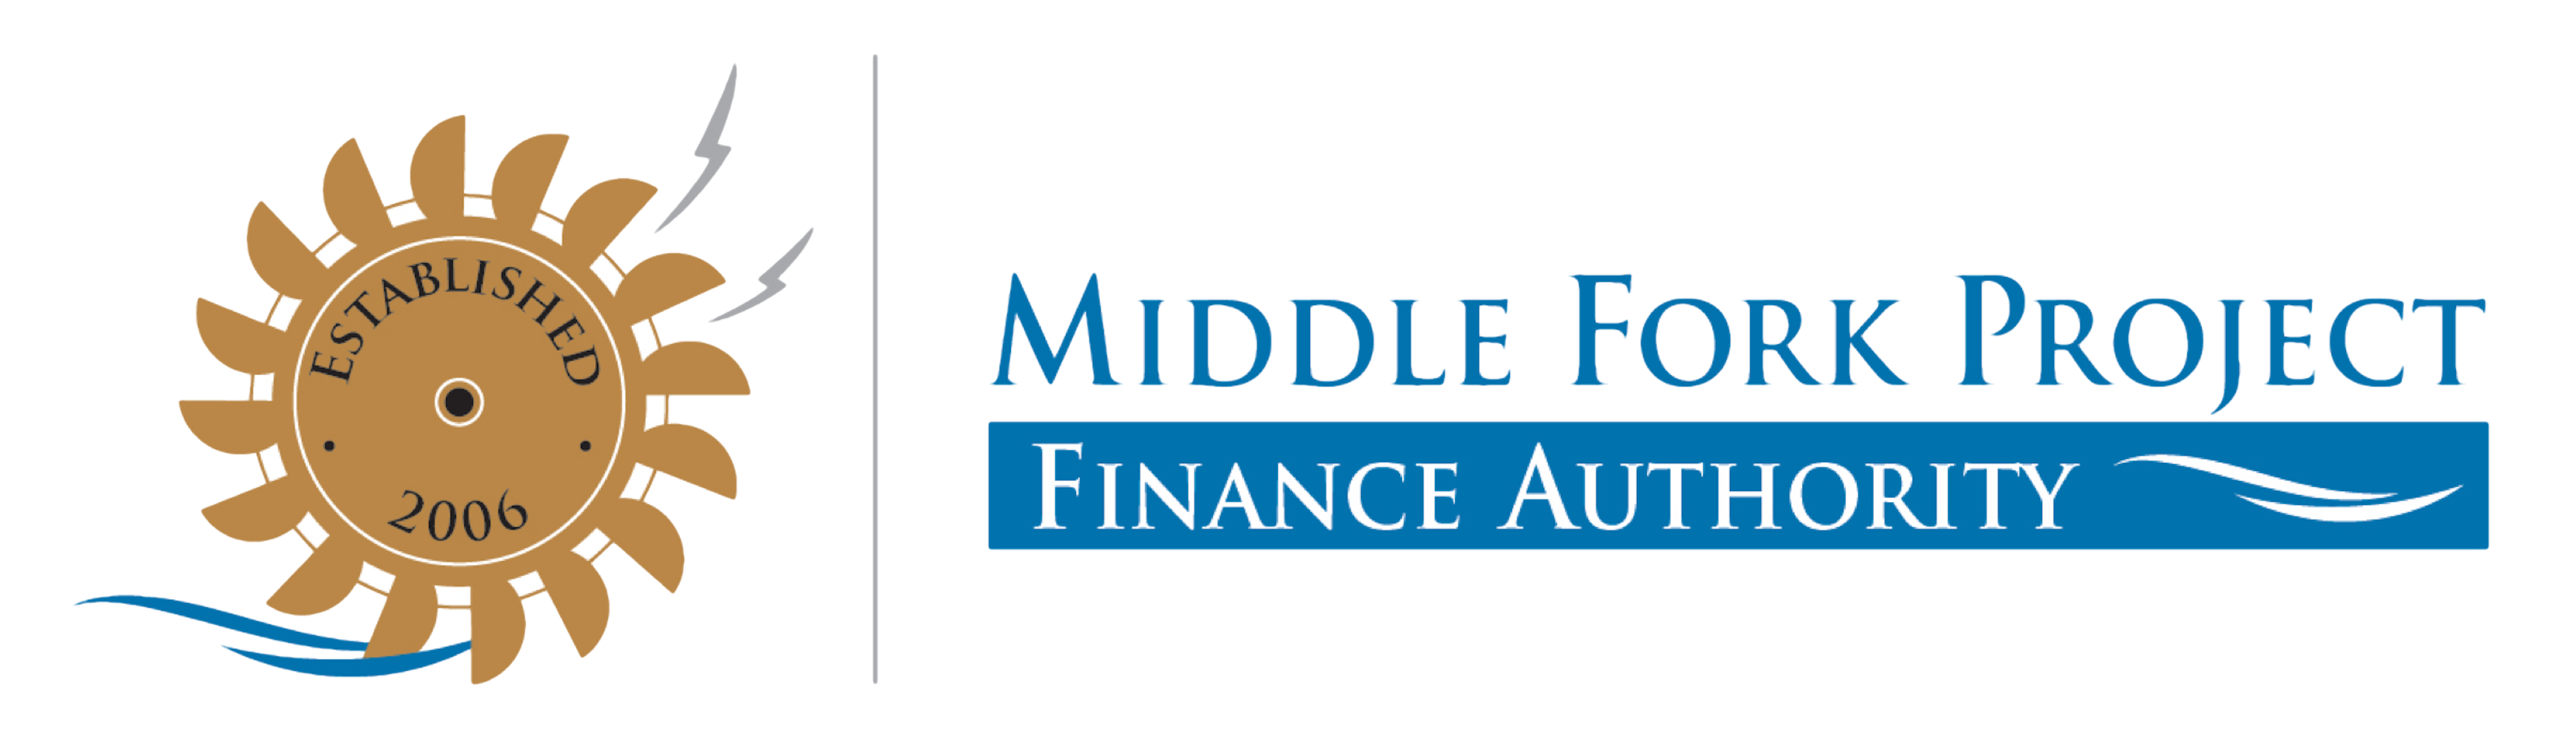 Middle Fork Project Finance Authority logo